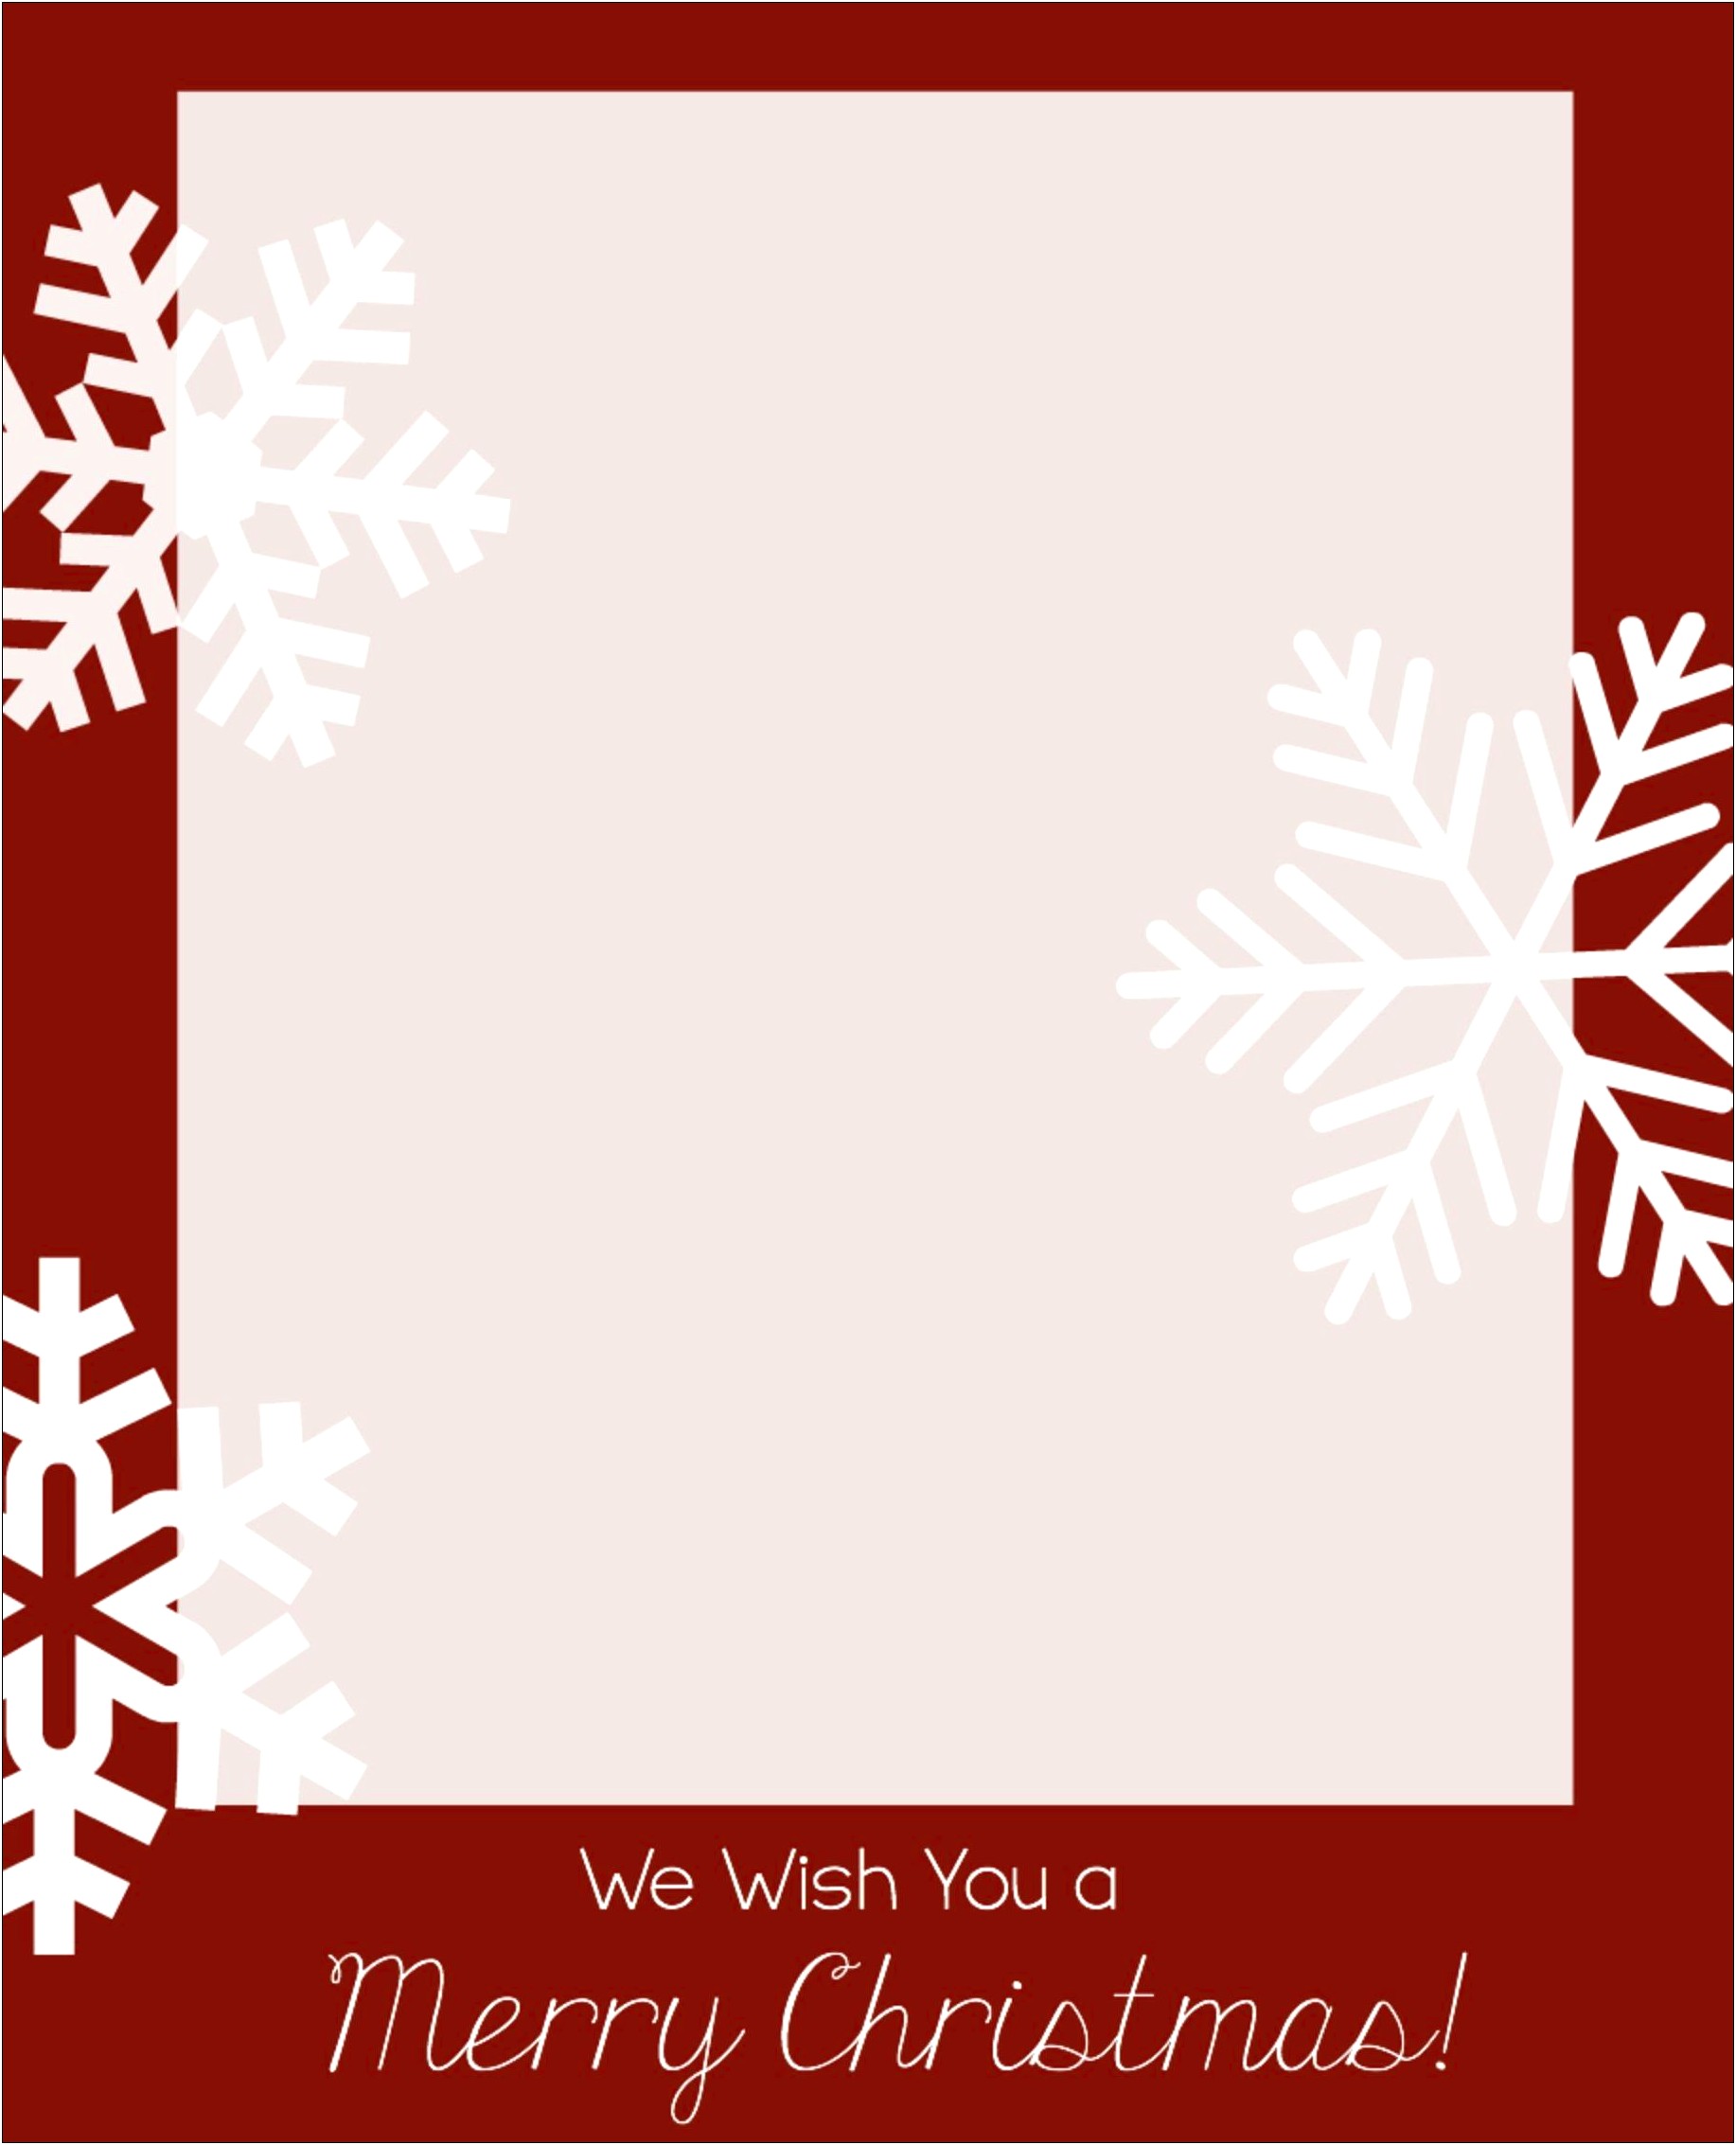 3-picture-christmas-card-template-free-templates-resume-designs